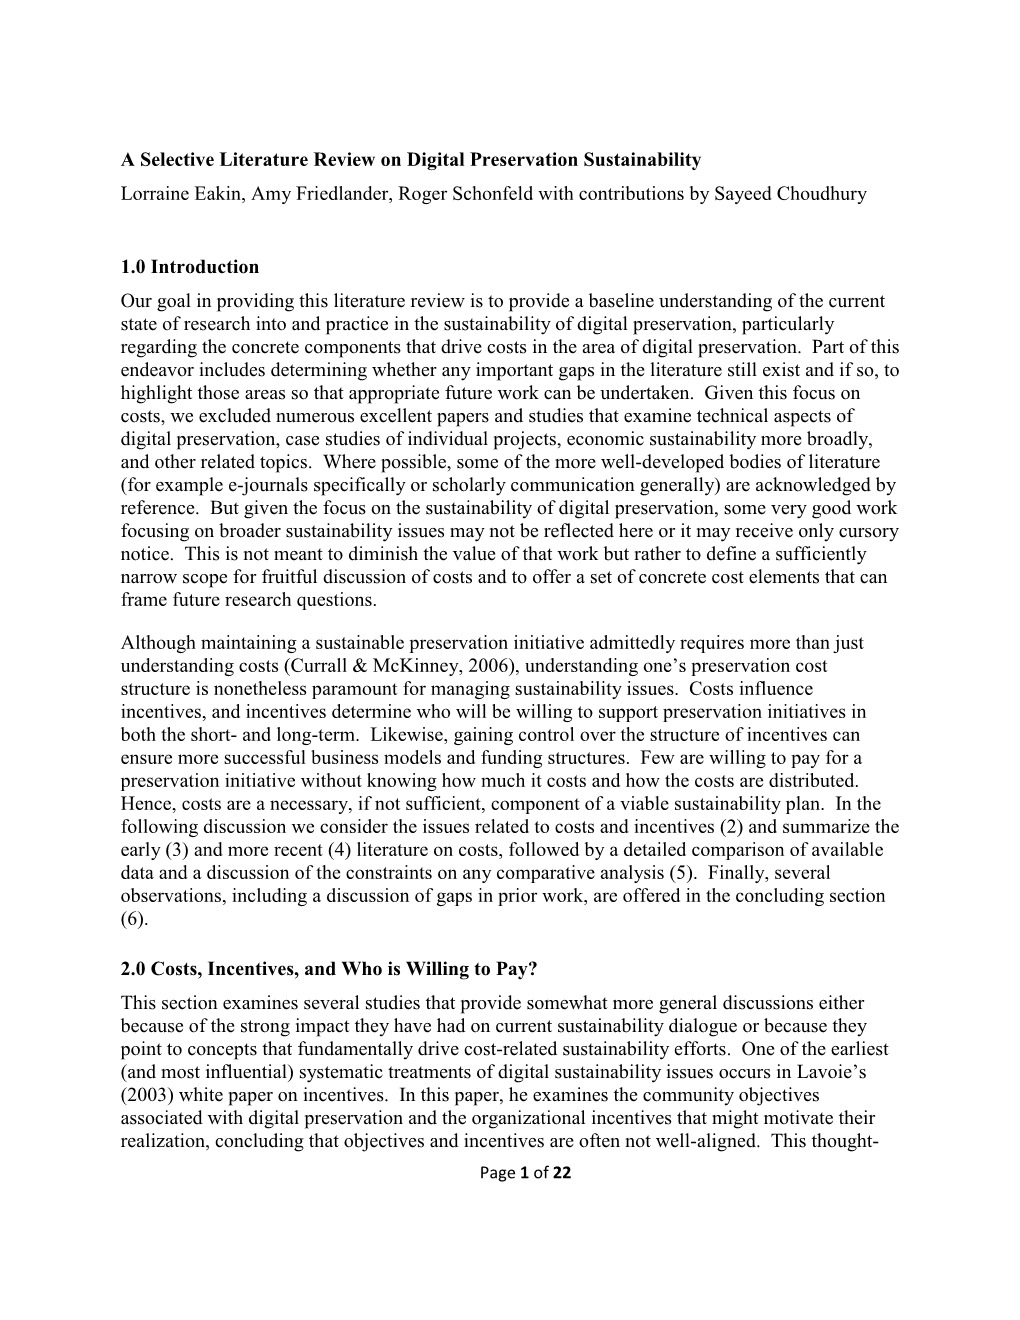 A Selective Literature Review on Digital Preservation Sustainability Lorraine Eakin, Amy Friedlander, Roger Schonfeld with Contributions by Sayeed Choudhury